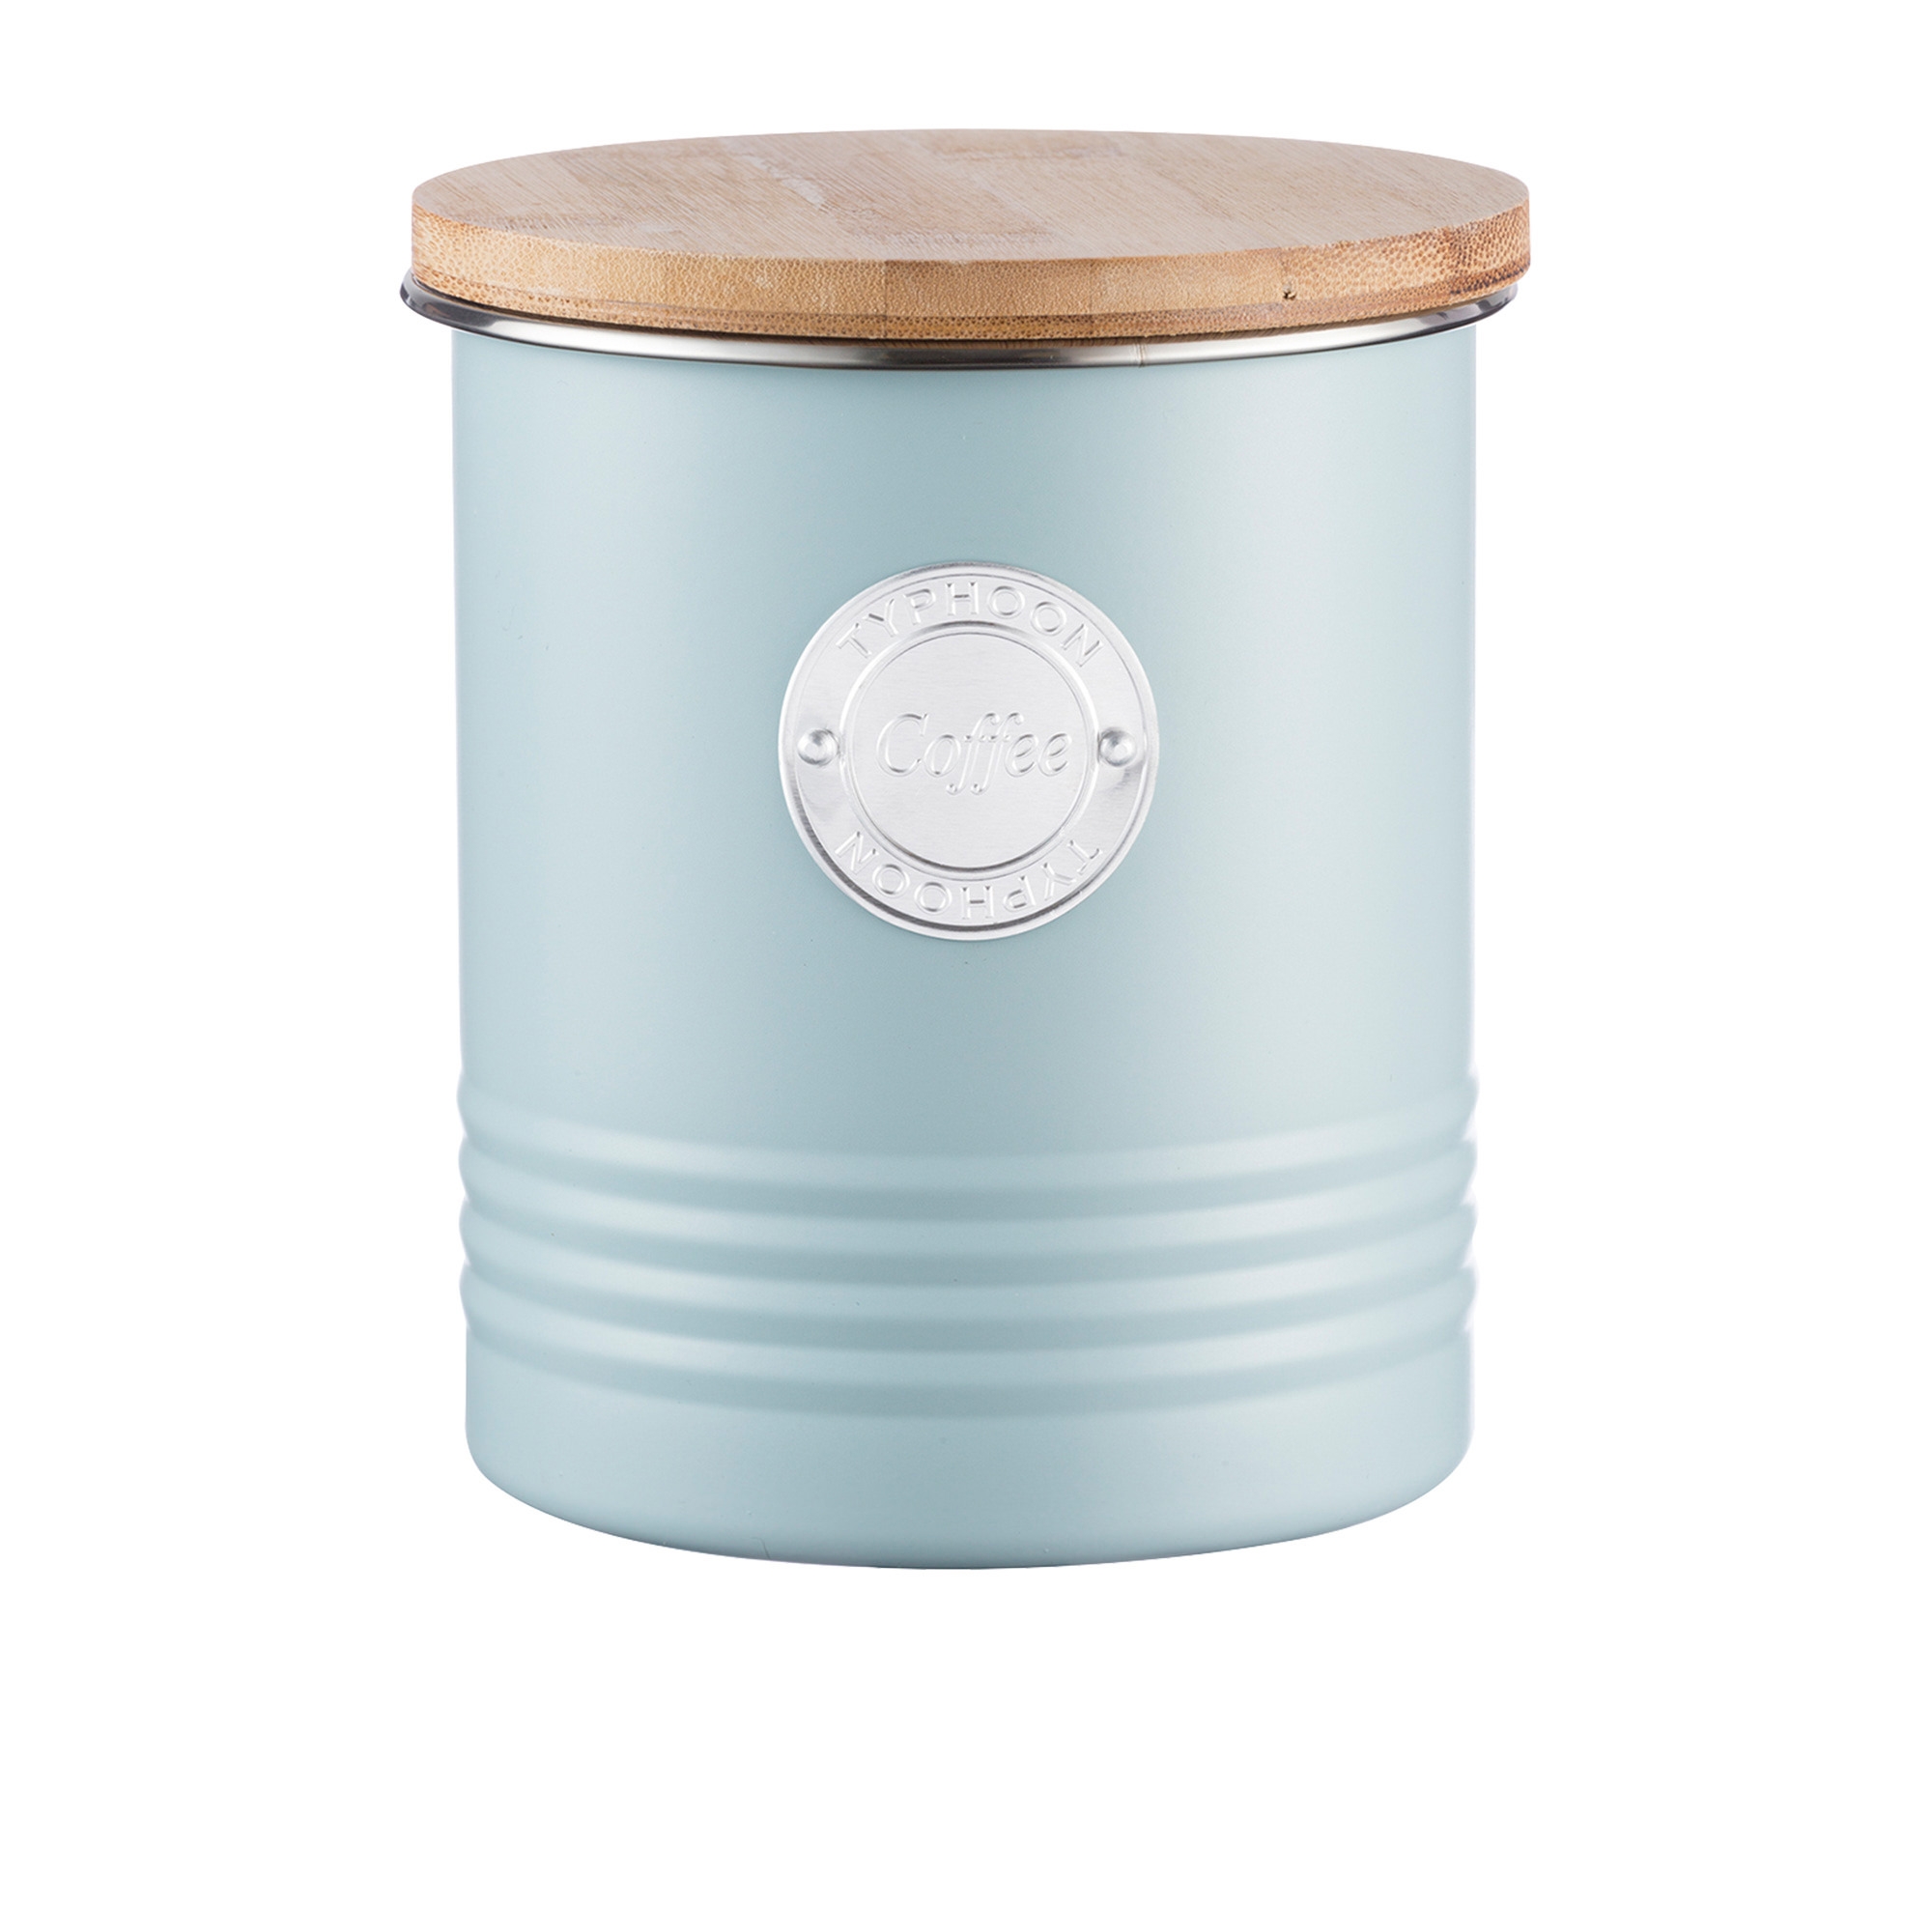 Typhoon Living Coffee Canister 1L Blue Image 1